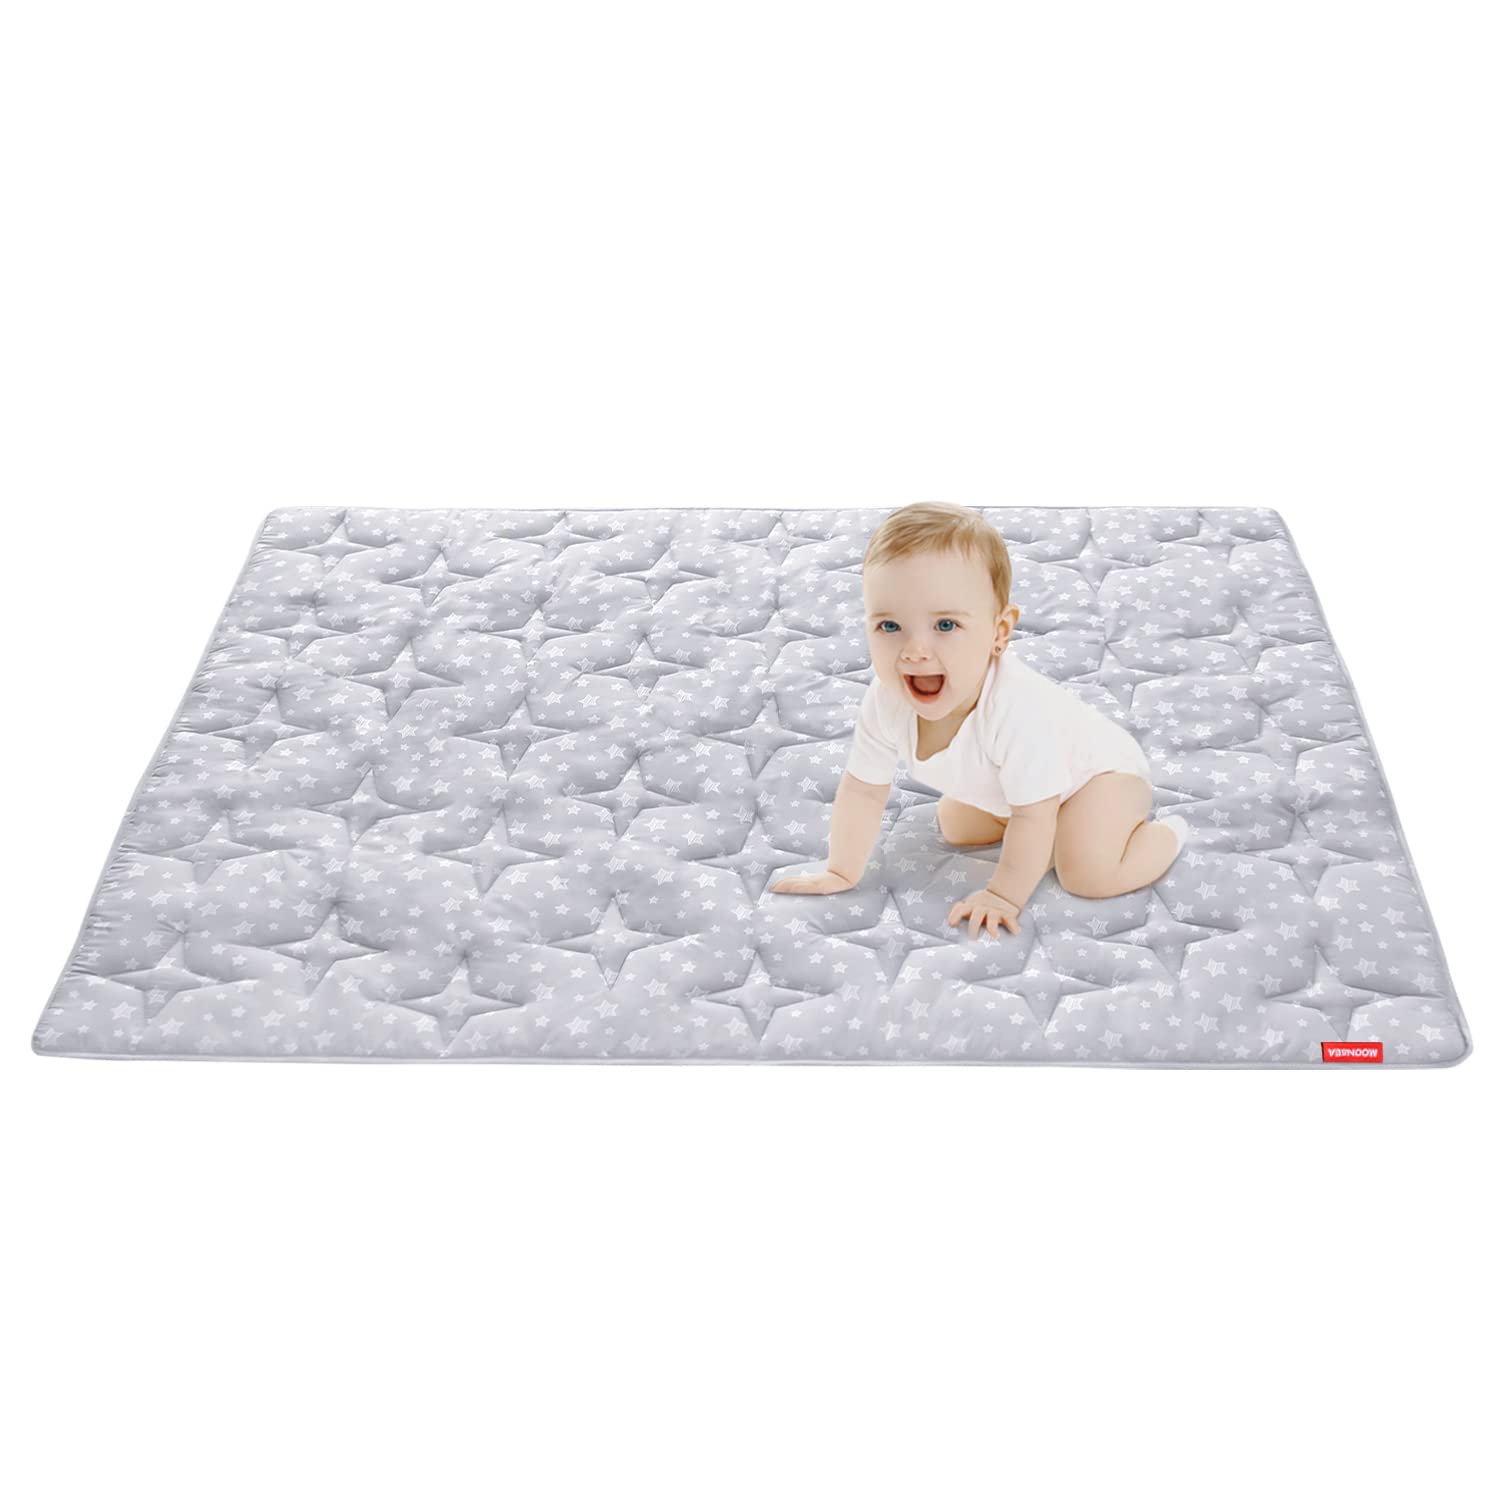 Baby Play Mat | Playpen Mat - 79" x 71", Large Padded Tummy Time Activity Mat for Infant & Toddler, Grey Star - Moonsea Bedding